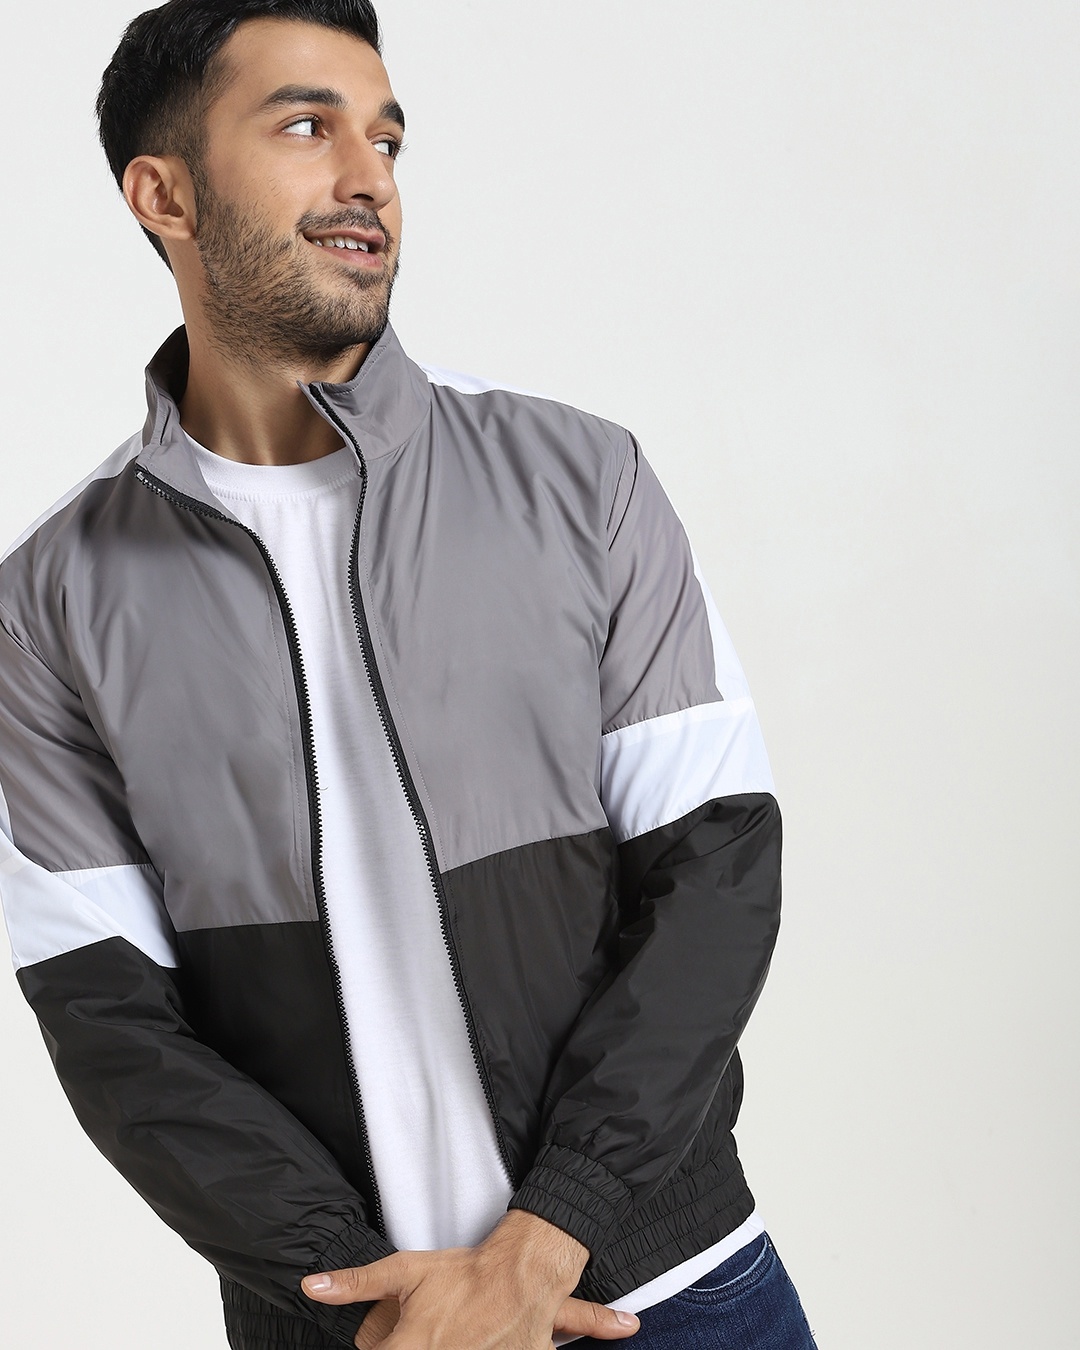 yellow shirt paired with Men's Grey & Black Colour Block Windcheater Jacket